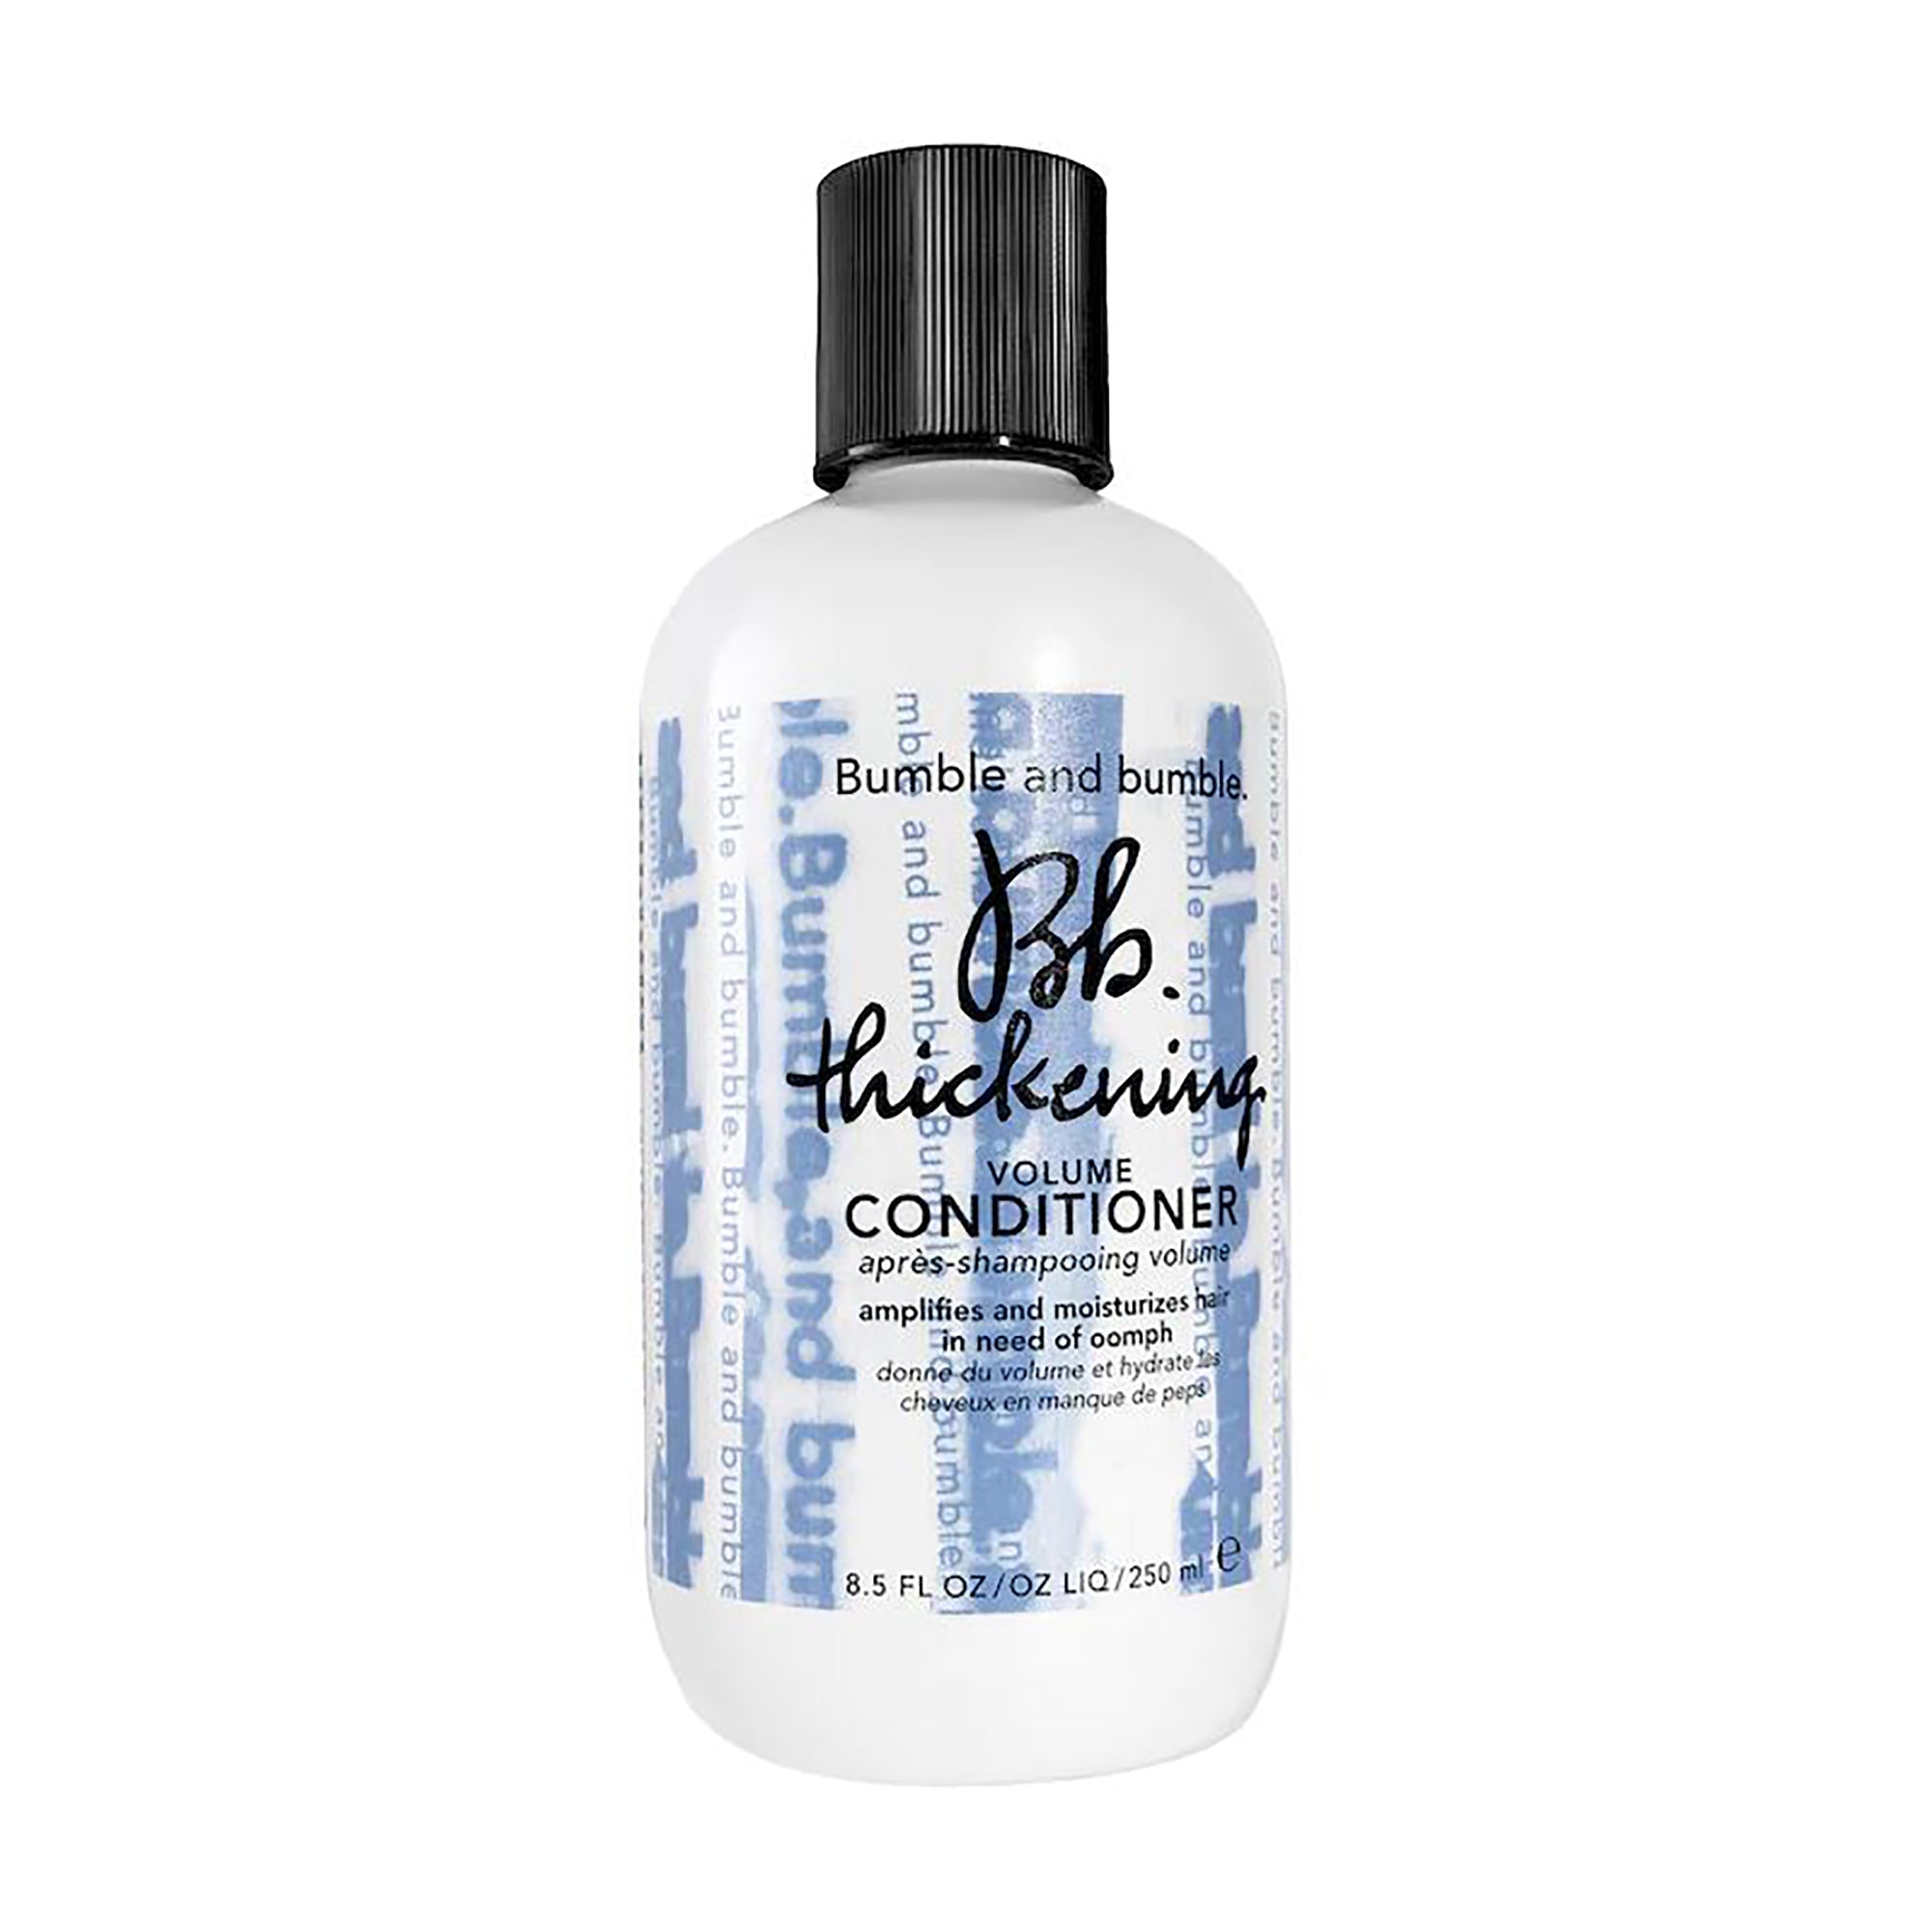 Bumble and bumble Thickening Conditioner / 8OZ